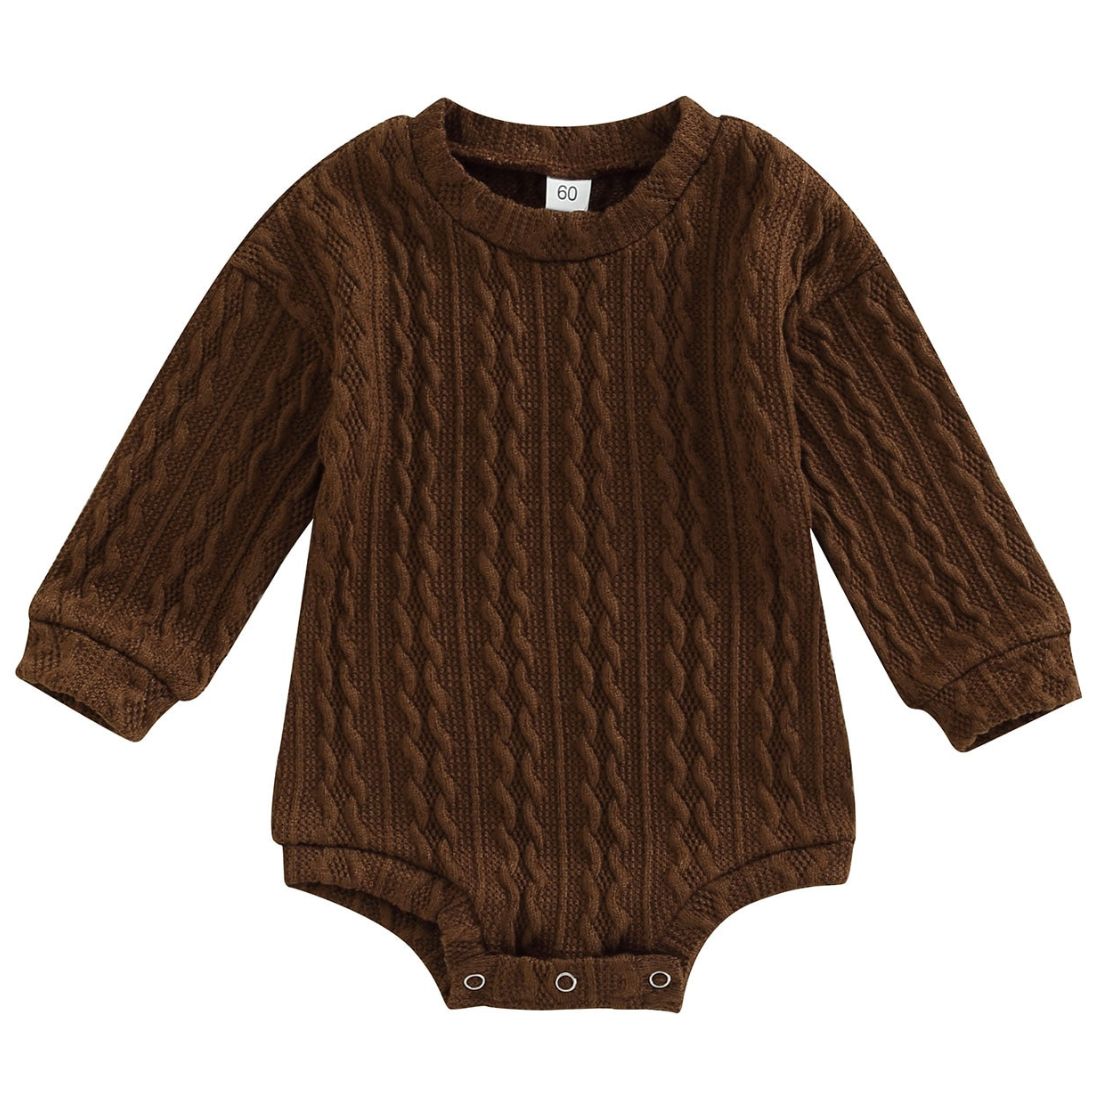 Unisex Baby Long Sleeve Braid Knit Bodysuit - My Trendy Youngsters | Buy on-trend and stylish Baby and Toddler Onesies and bodysuits @ My Trendy Youngsters - Dress your little one in Style @ My Trendy Youngsters 